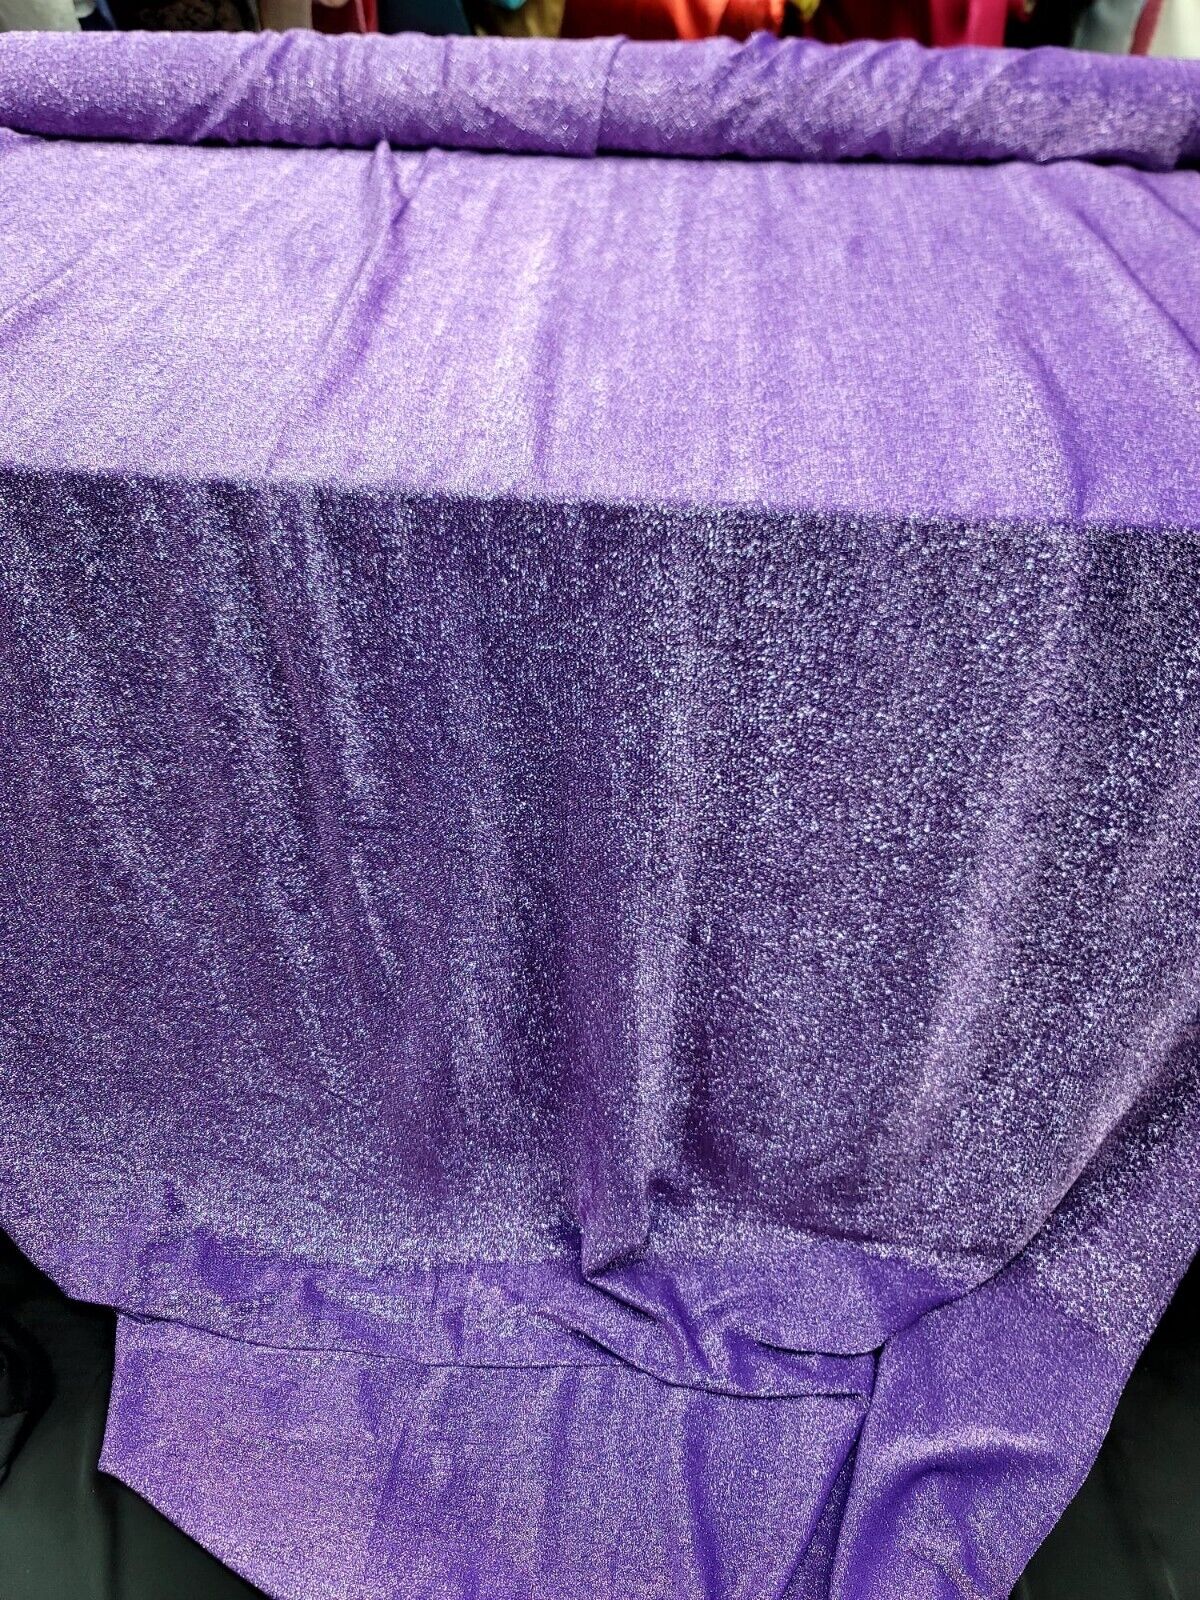 Lame Lavender Fabric Sold By The Yard Shimmer Stretch Sheer Fabric For Dress